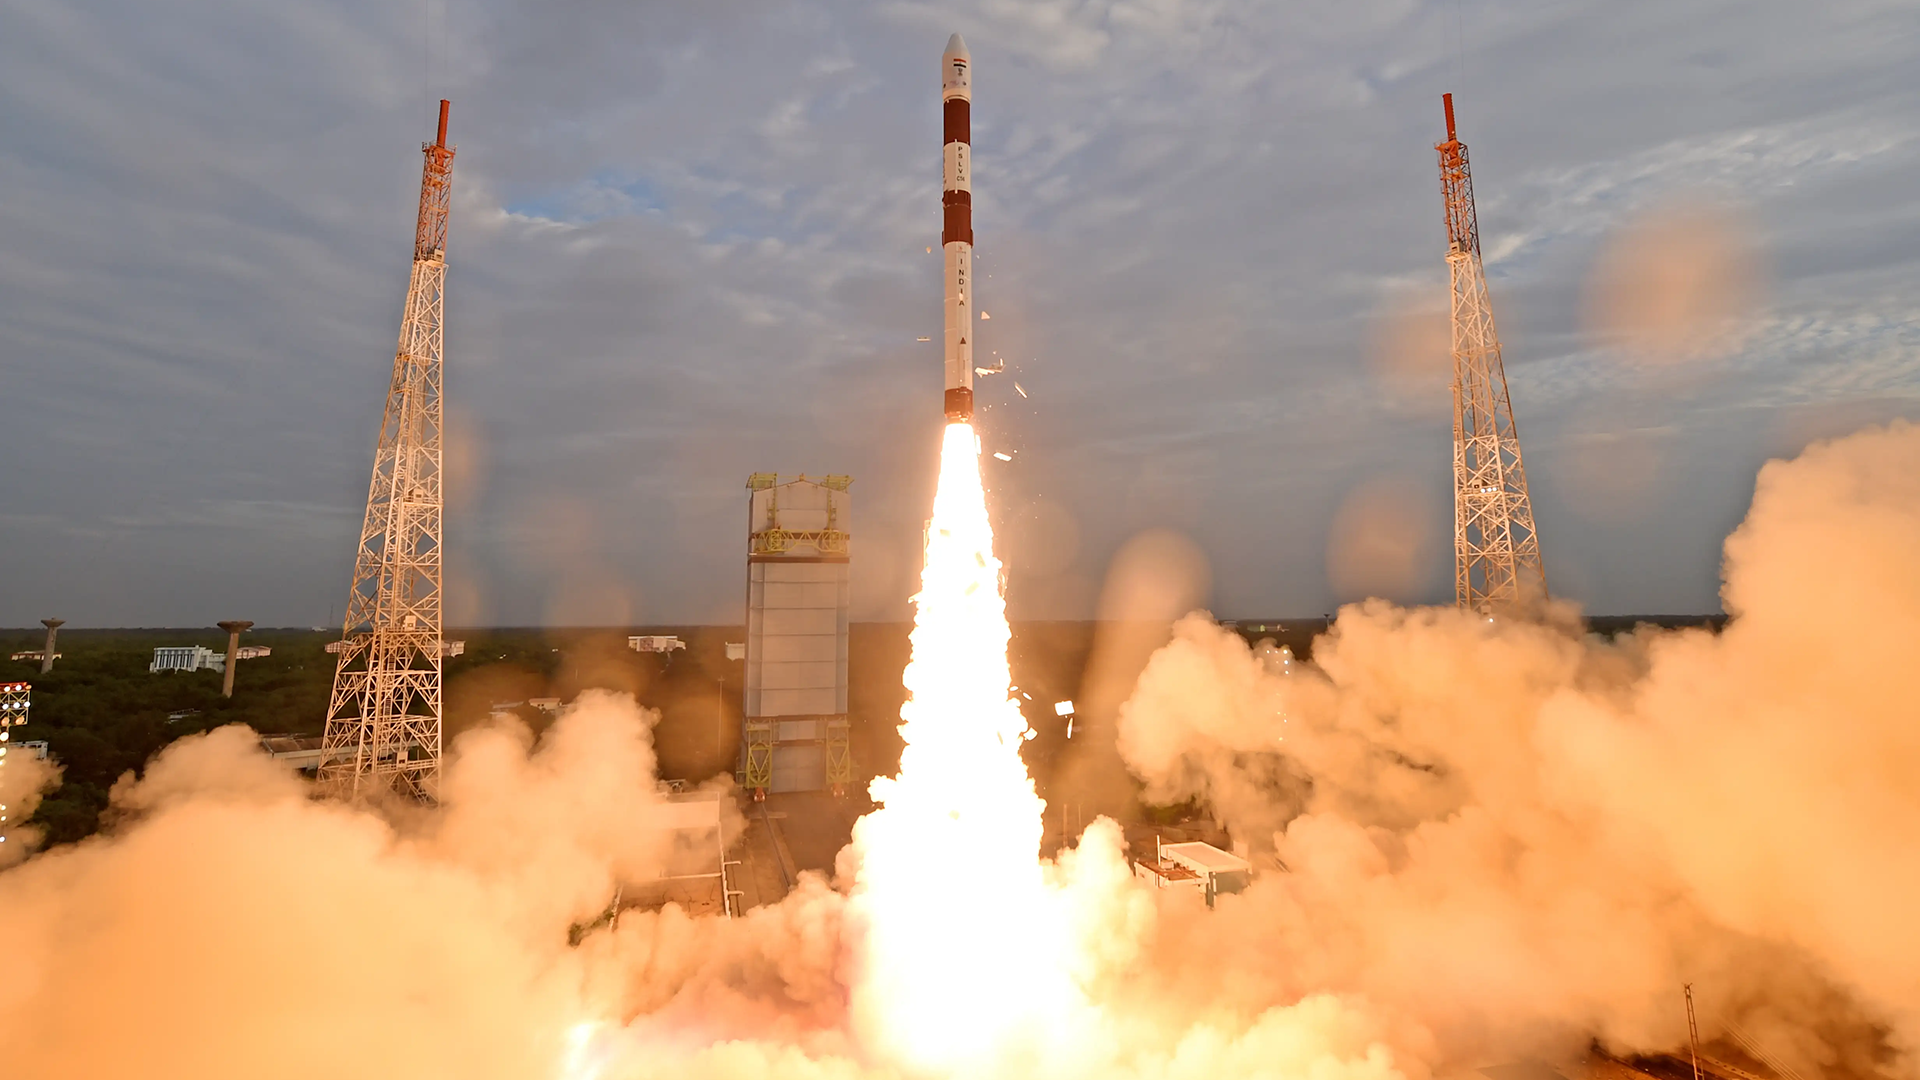 Galassia-2 was launched into orbit aboard an Indian-operated PSLV rocket (Photo: ISRO)